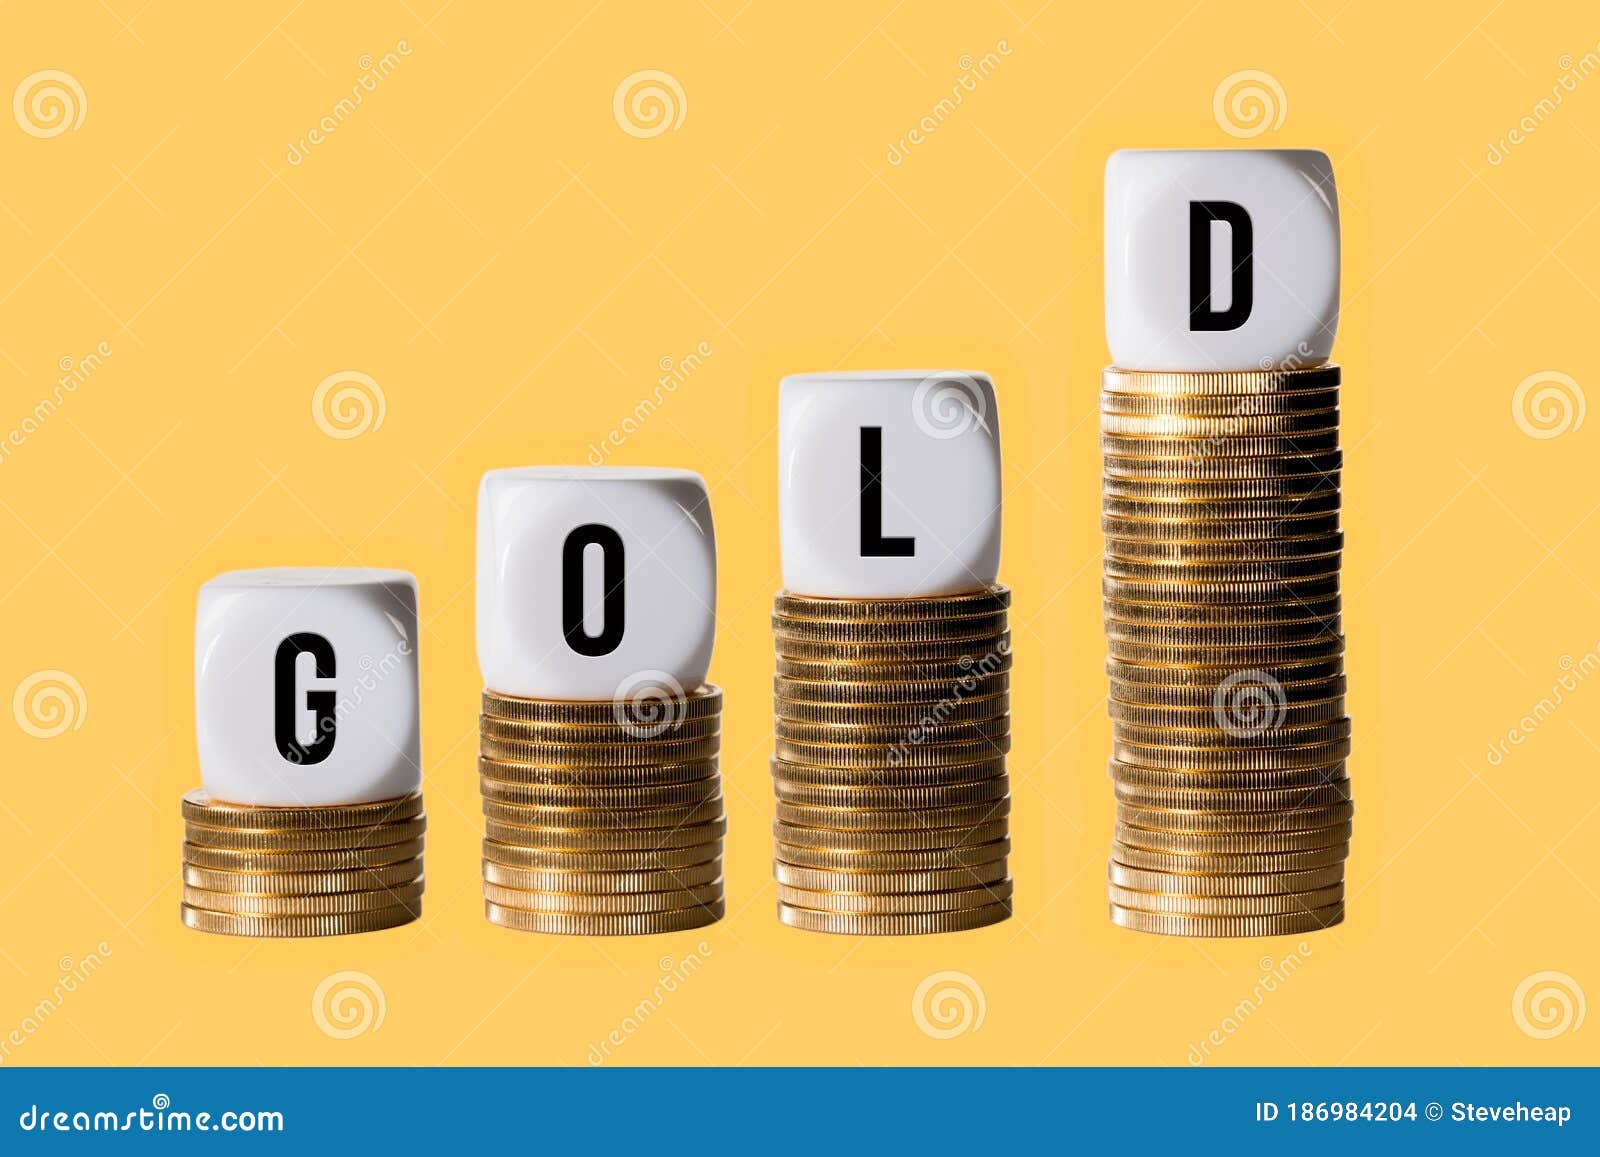 Stacks Of Gold Coins With Cubes Spelling GOLD To Show Rise ...